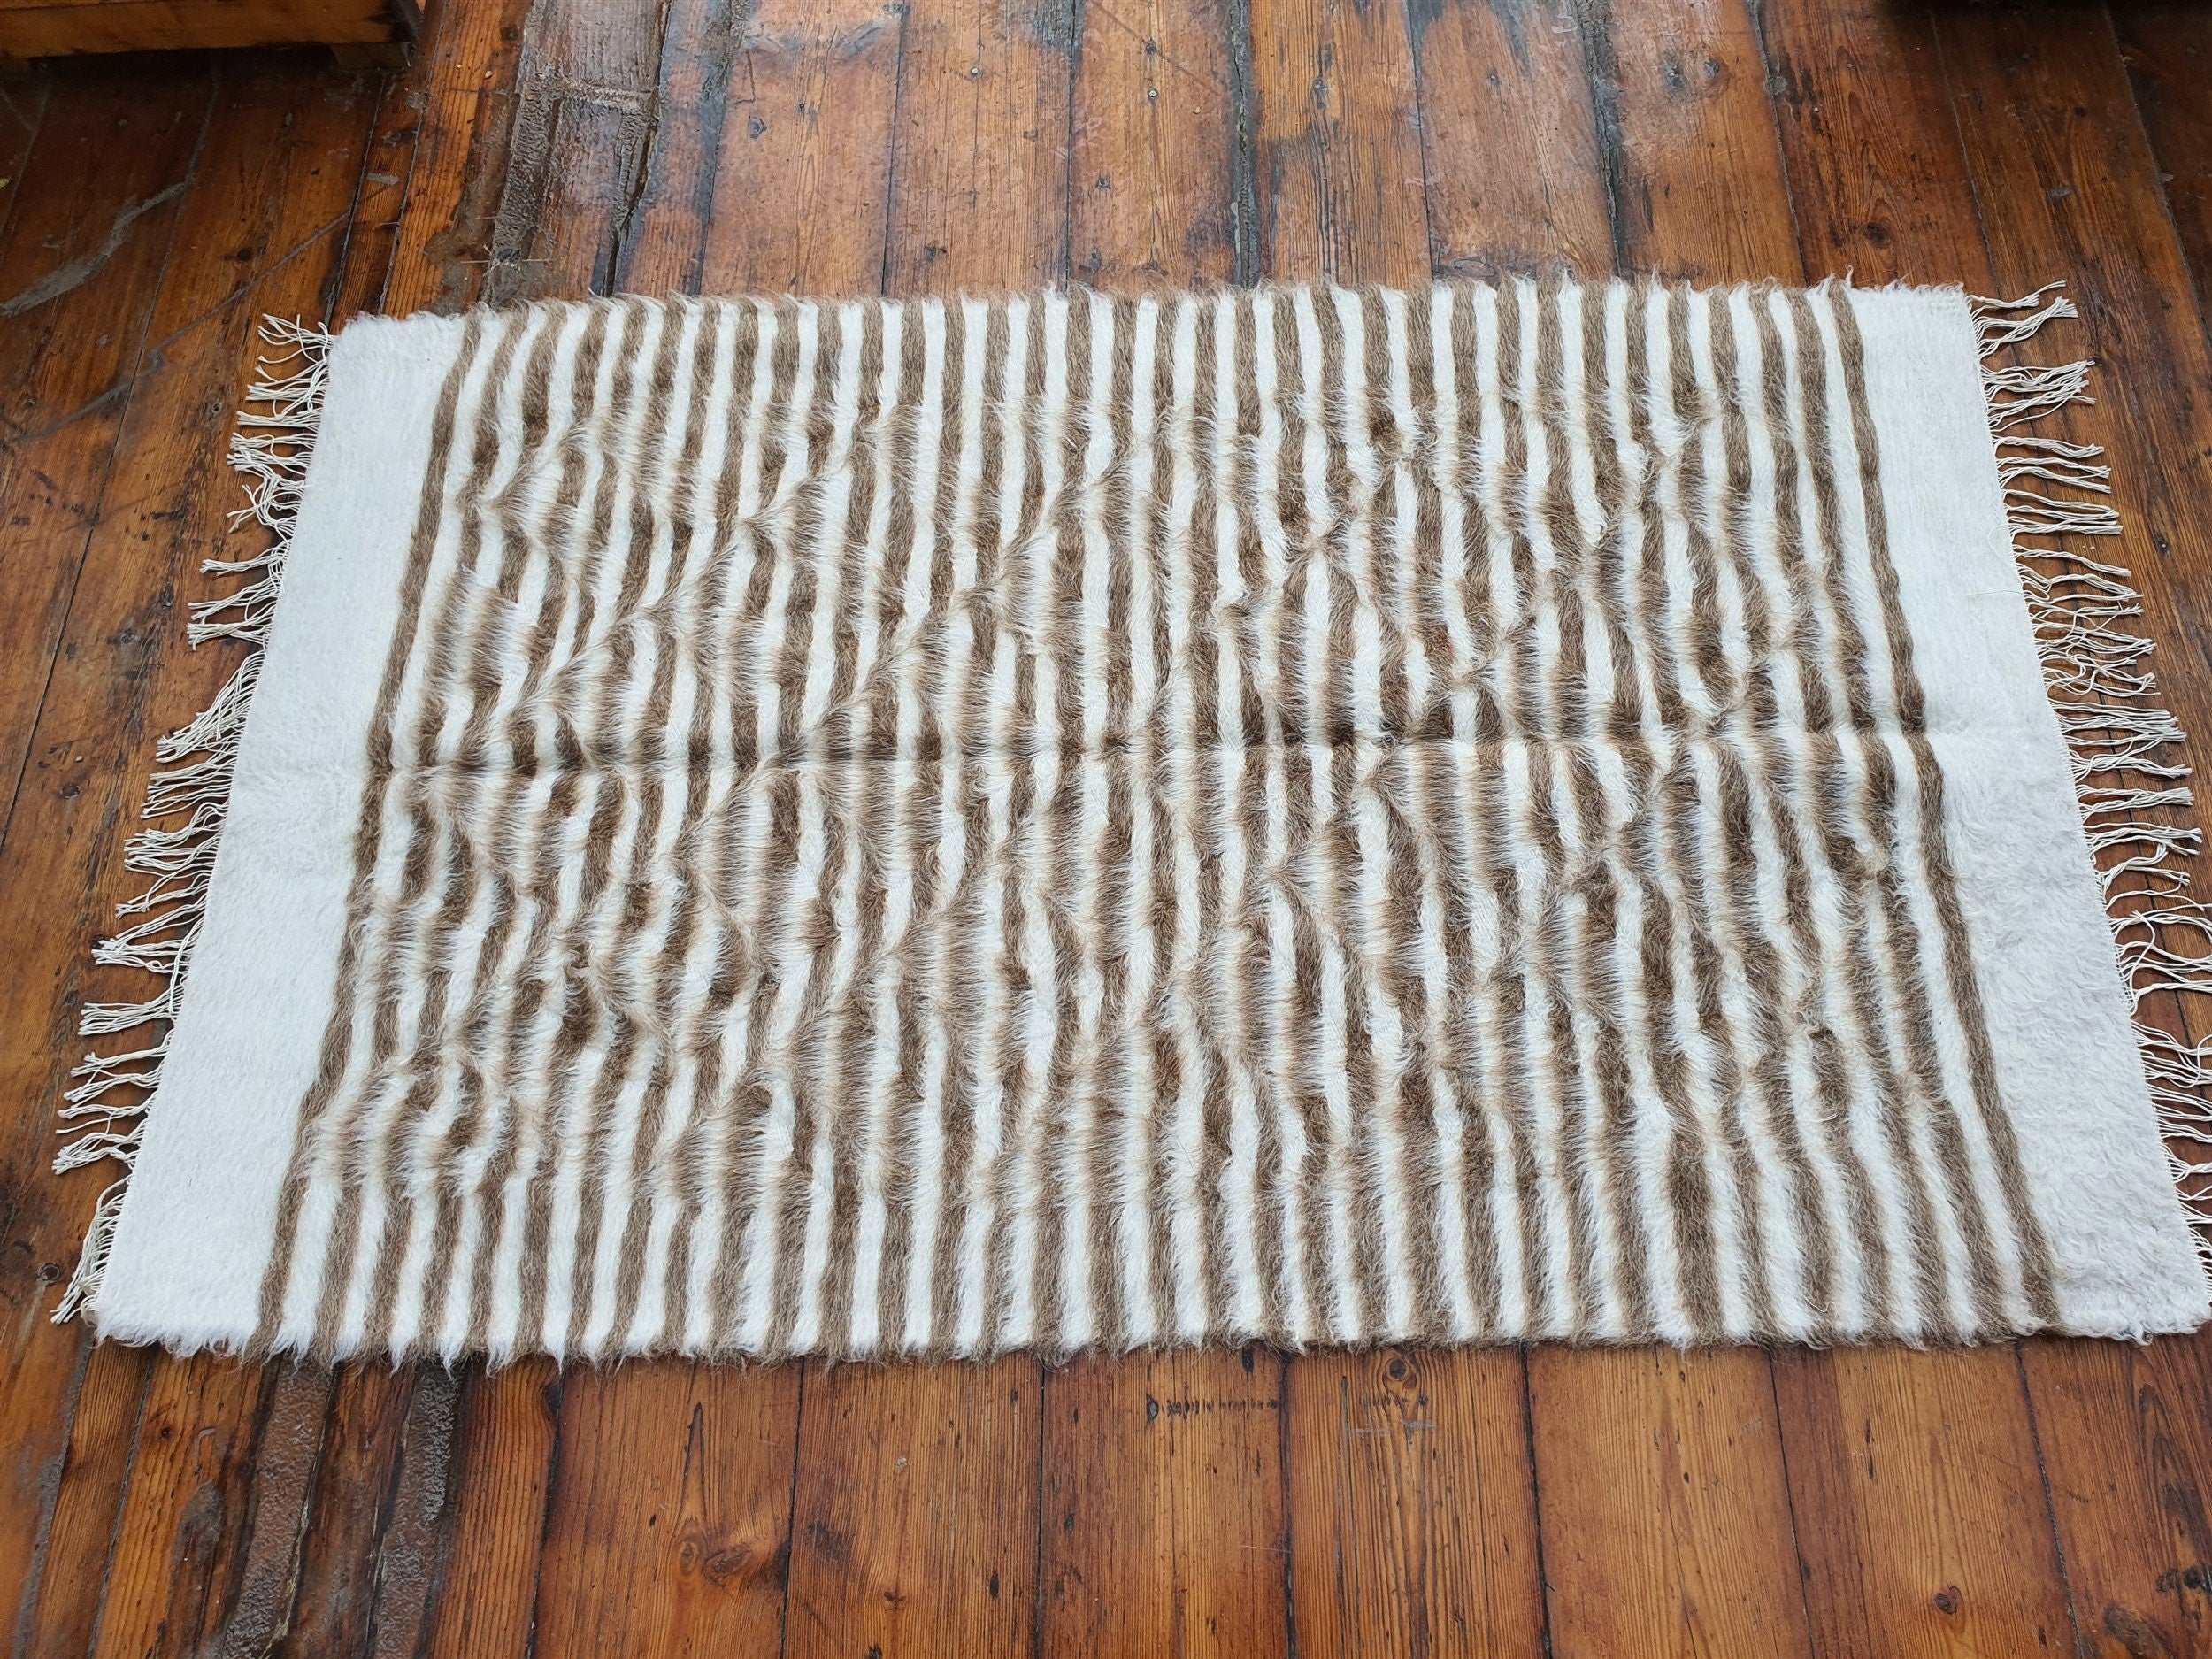 Undyed Siirt Angora Mohair Rug 4 ft x 2 ft 5 in, Brown and White Turkish Tulu Kilim Door Mat